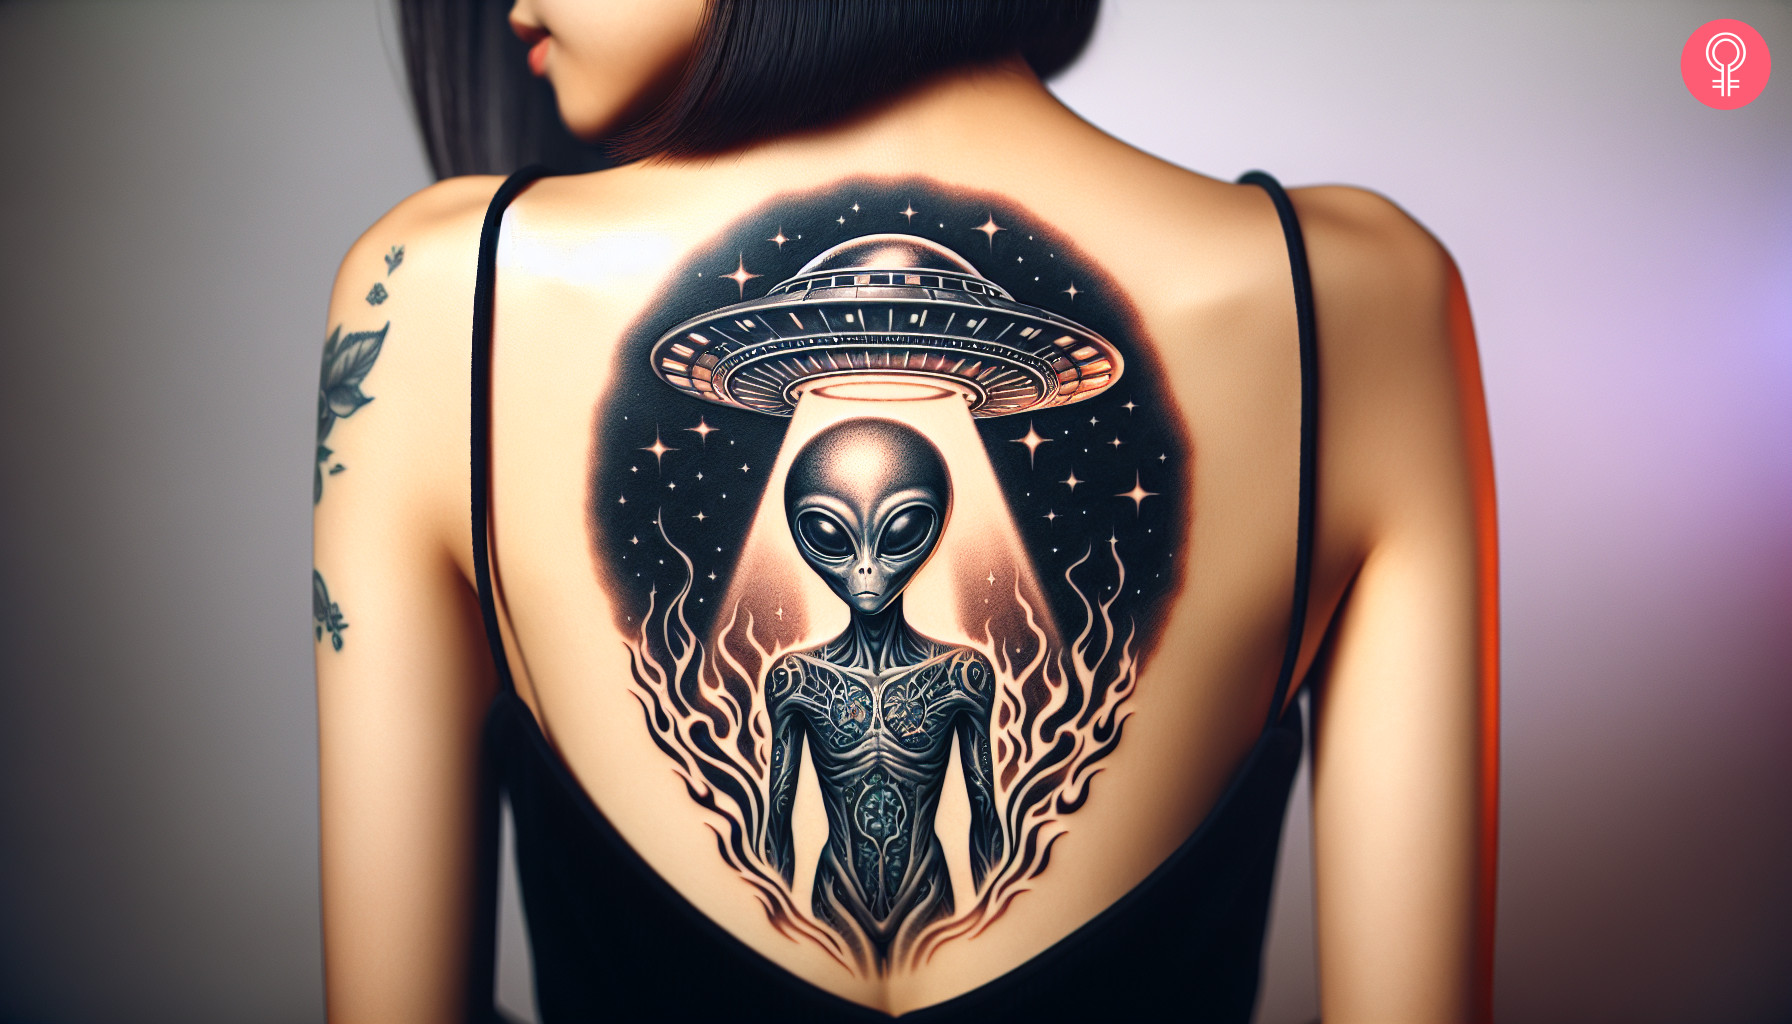 Woman with alien UFO tattoo on her upper back